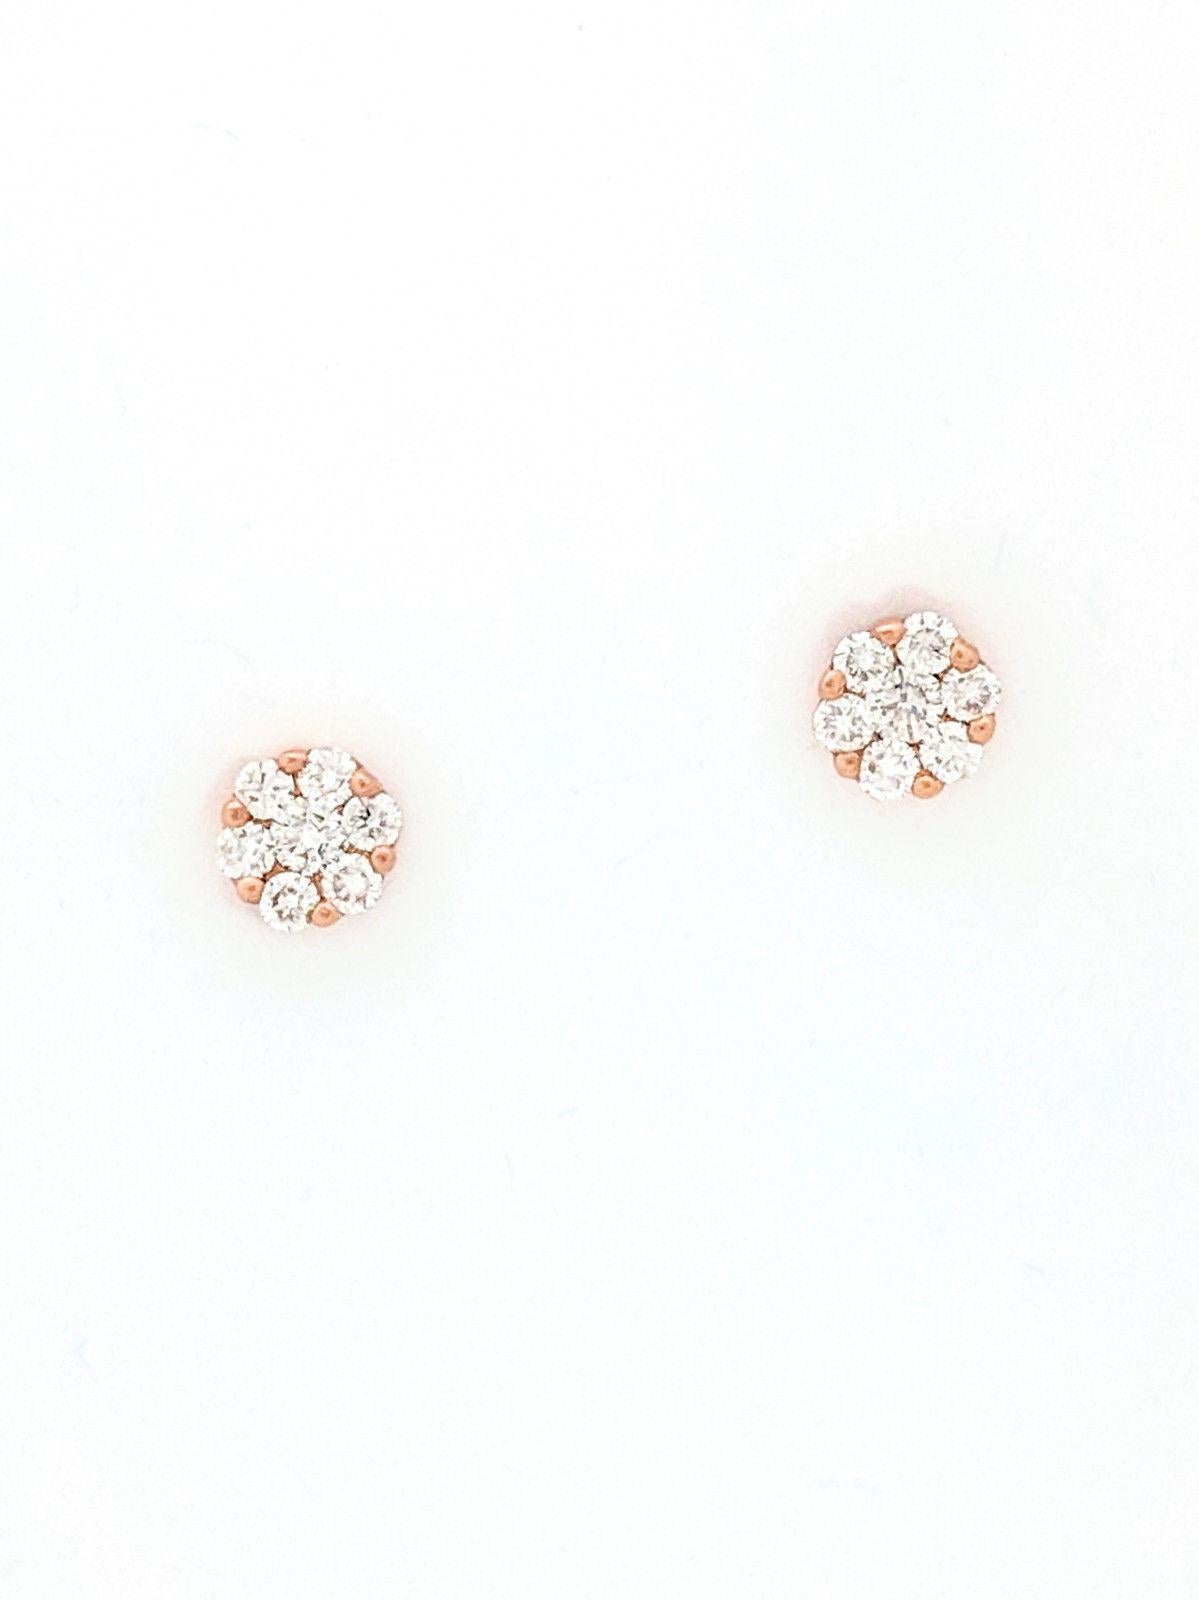 You are viewing a Beautiful Pair of Illusion Set Diamond Stud Earrings. These earrings are crafted from 14k rose gold and weighs .9 grams. Each earring features (1) .07ct natural round brilliant cut diamond placed in the center of (6) .03ct round